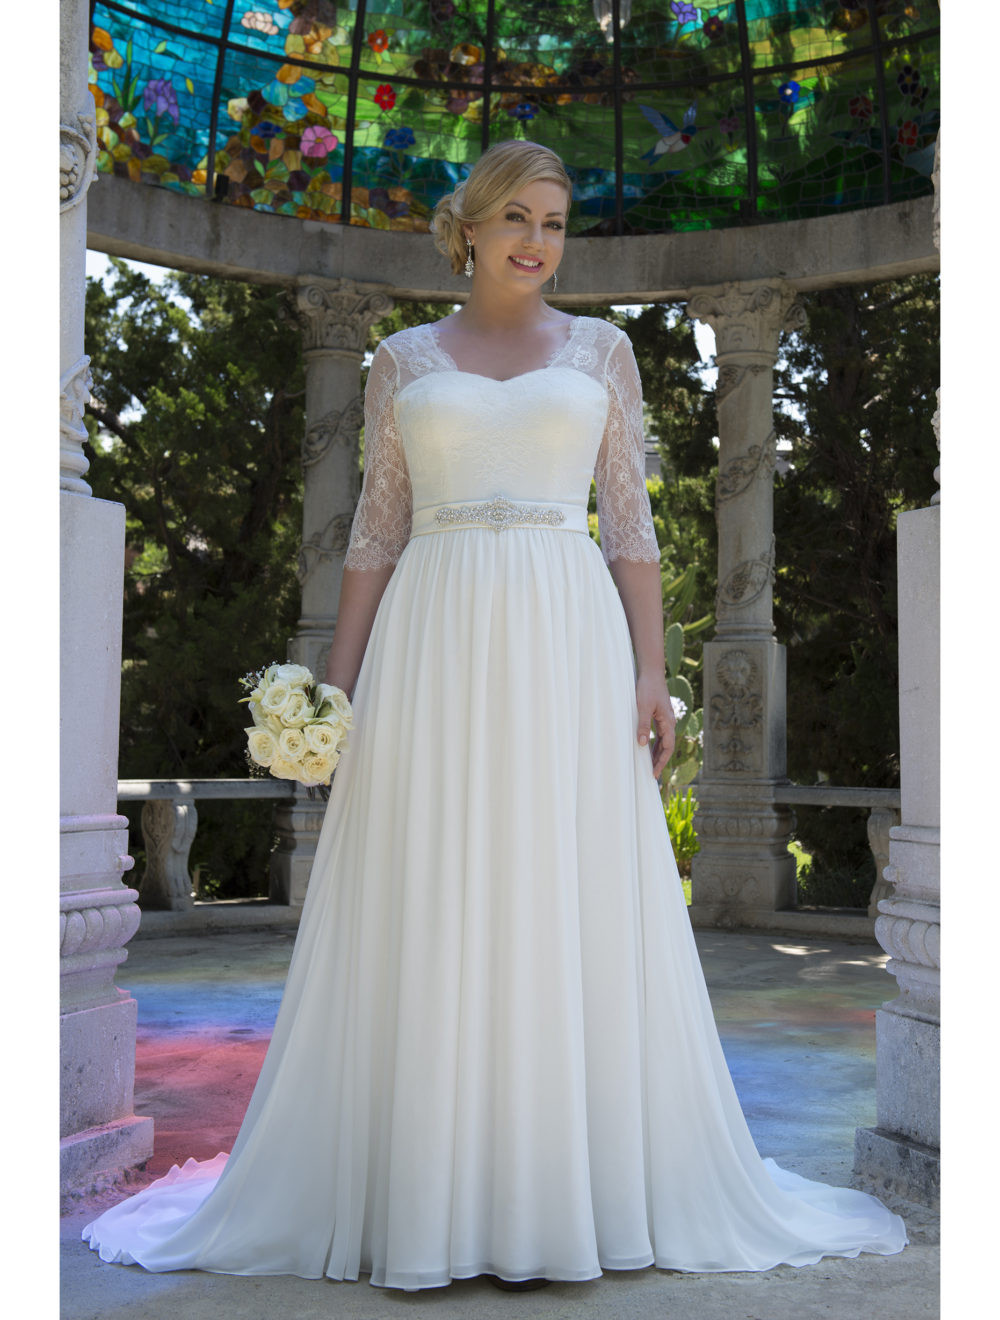 Modest Wedding Gowns With Sleeves
 Informal Lace Chiffon Modest Plus Size Wedding Dresses